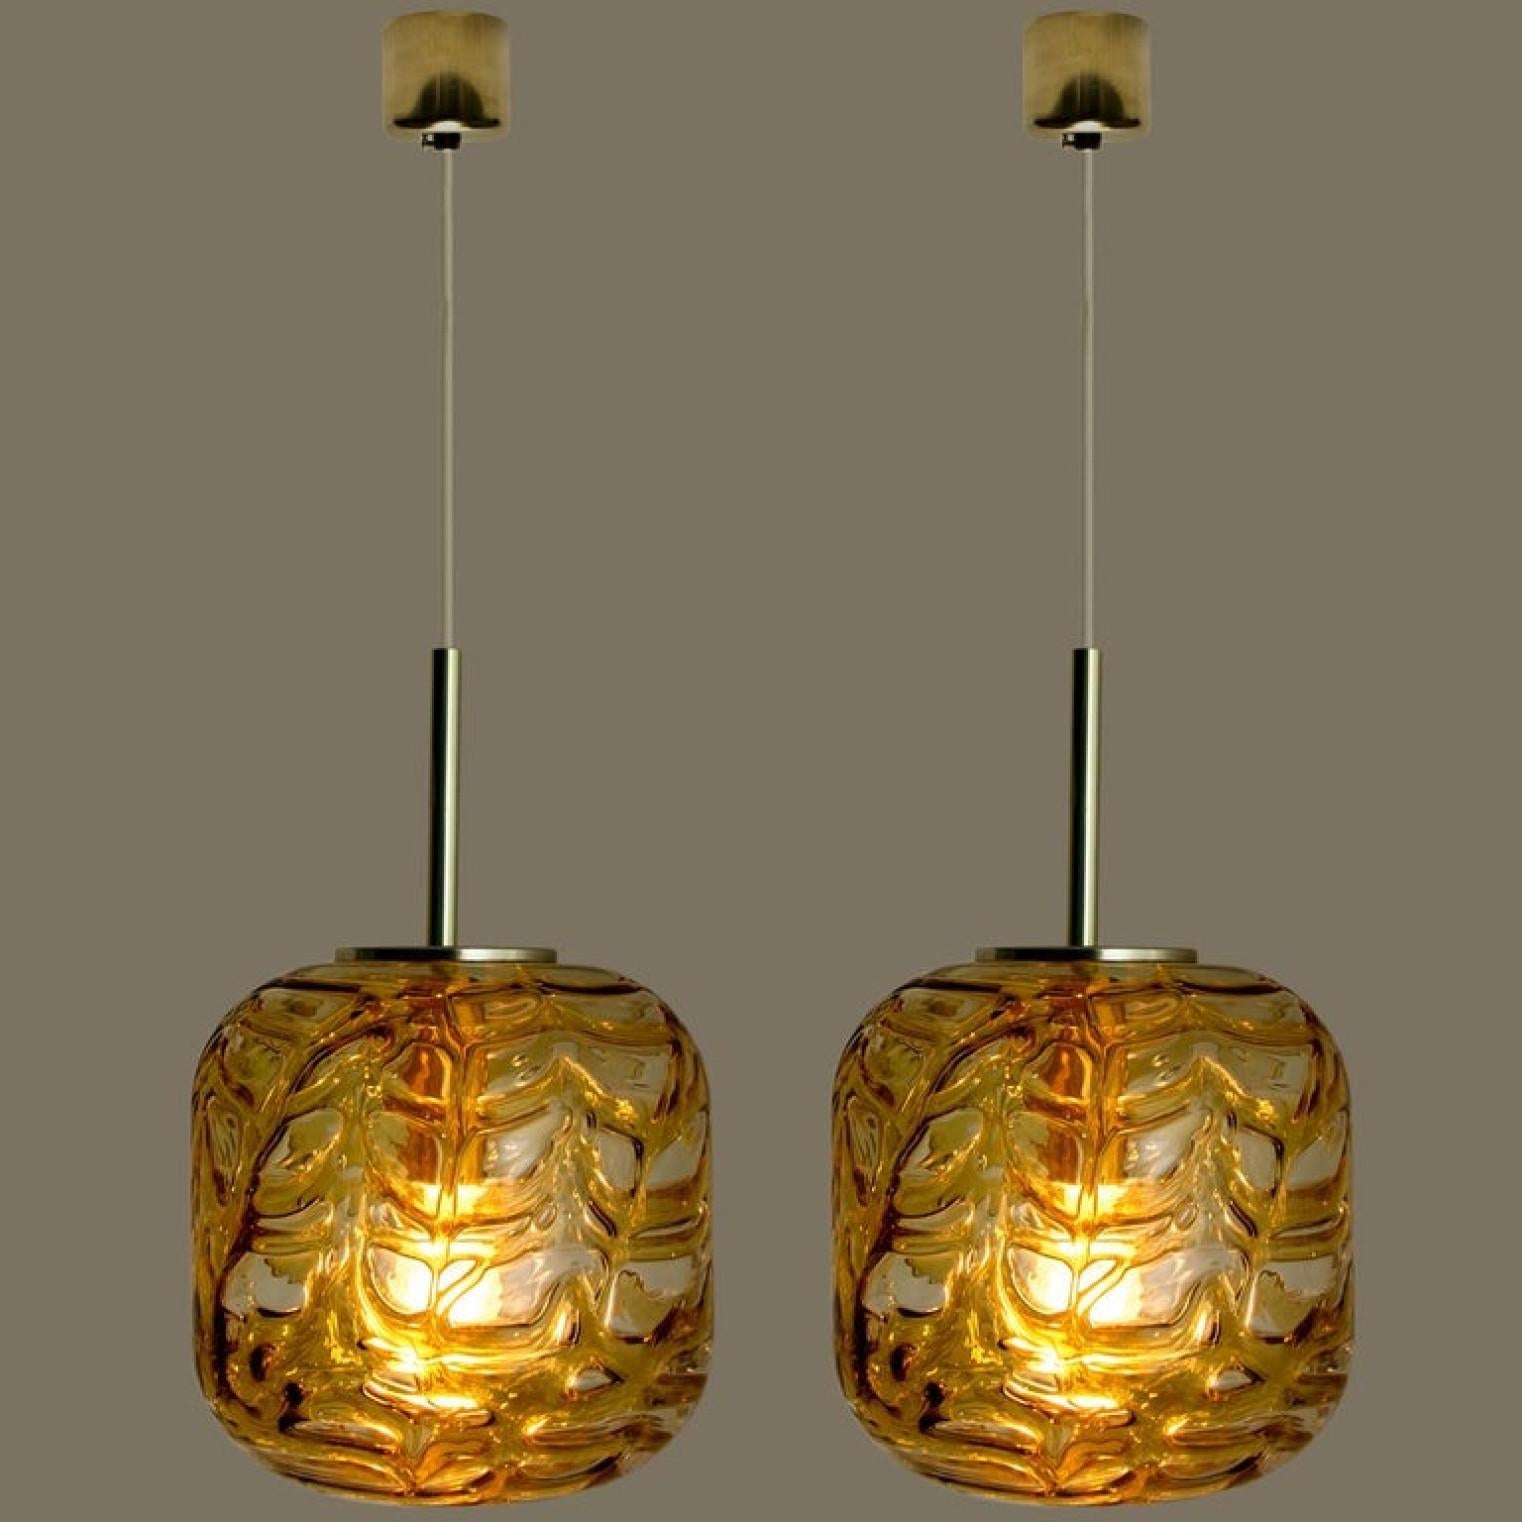 Exceptional Pair of Amber Murano Glass Pendant Lights Venini Style, 1970 For Sale 1